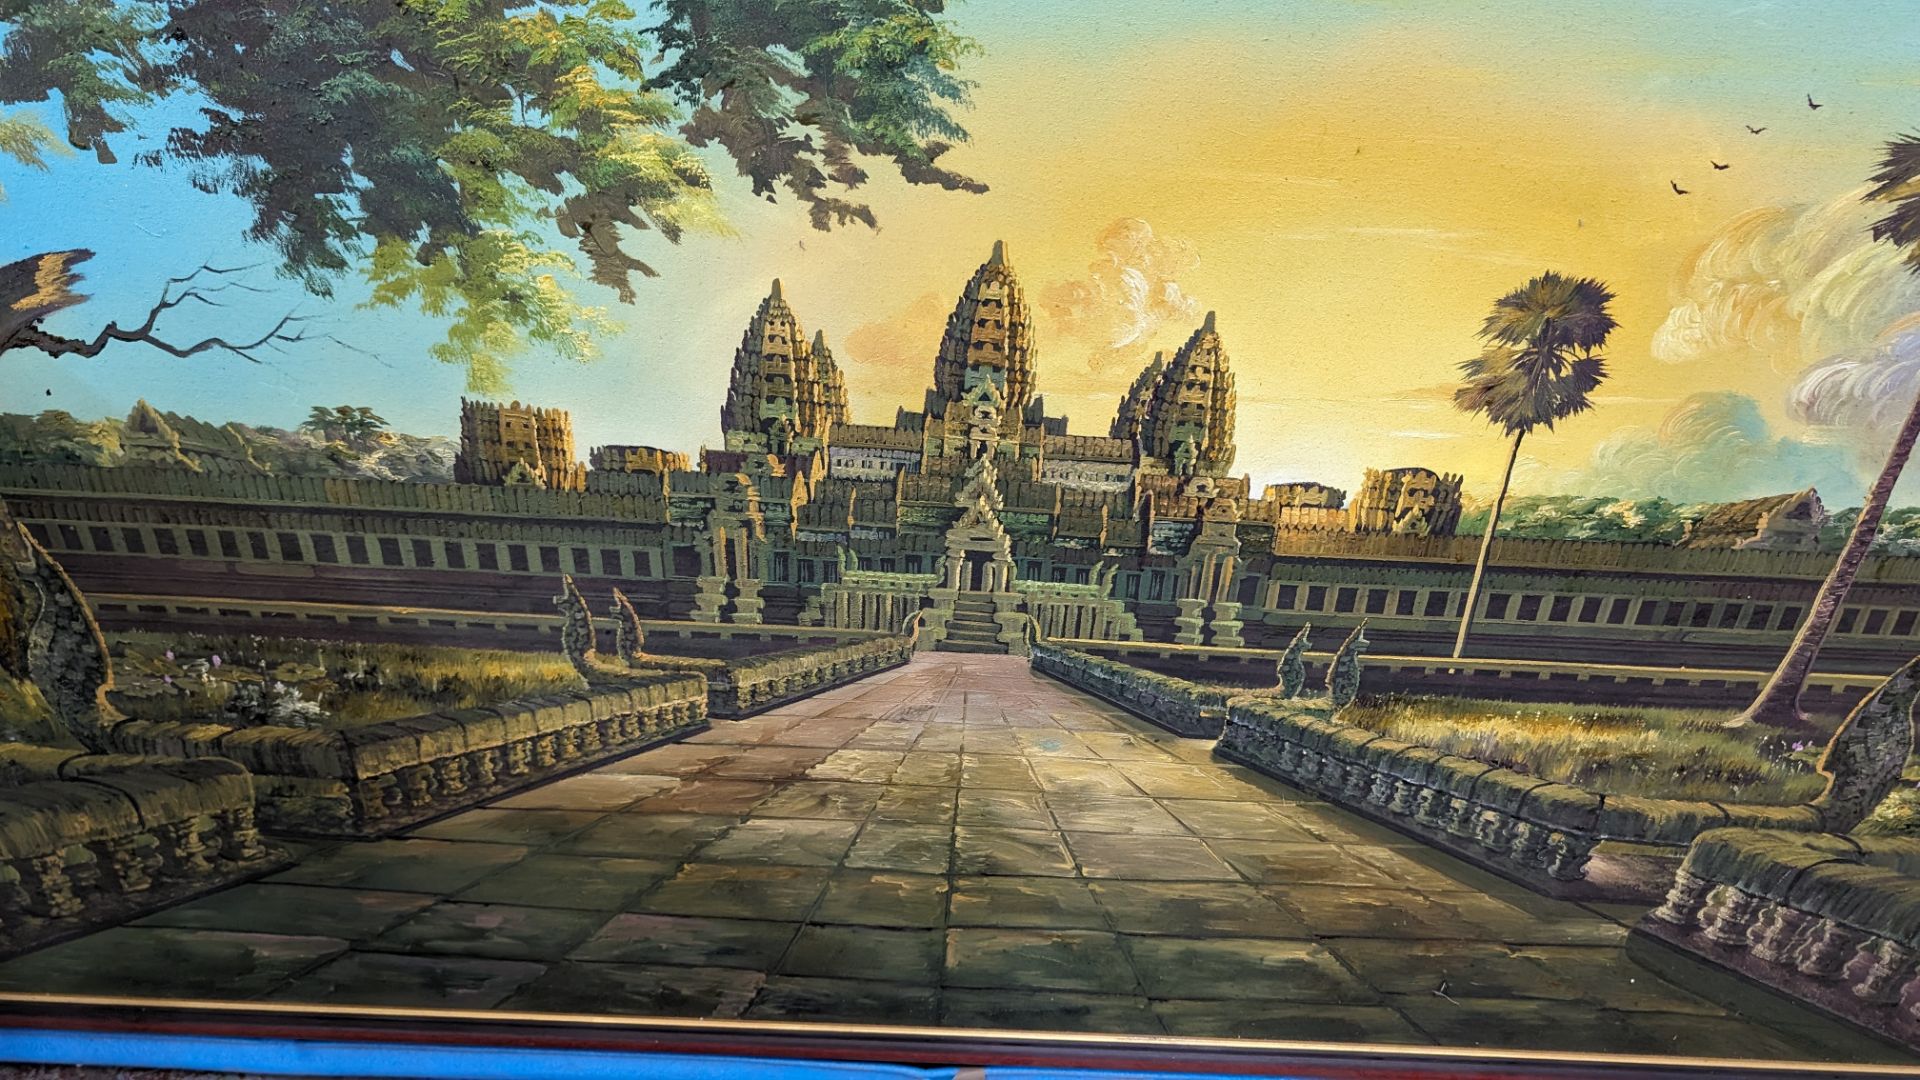 Large Cambodian oil painting of Angkor Wat, imported from Cambodia then stretched/framed in the UK. - Image 3 of 13